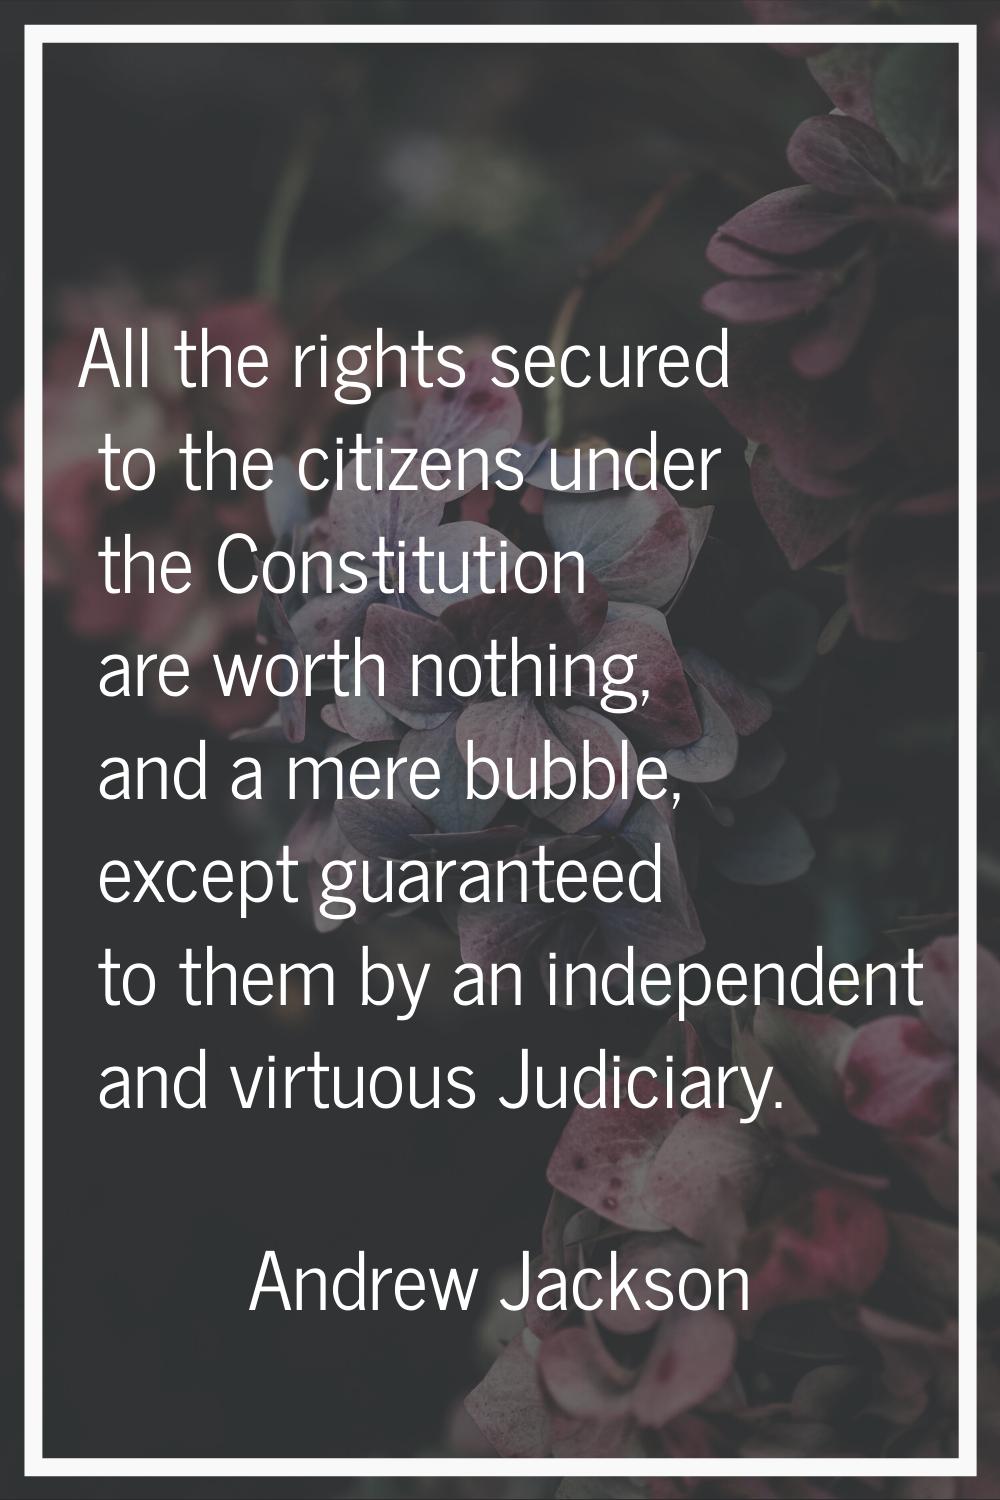 All the rights secured to the citizens under the Constitution are worth nothing, and a mere bubble,